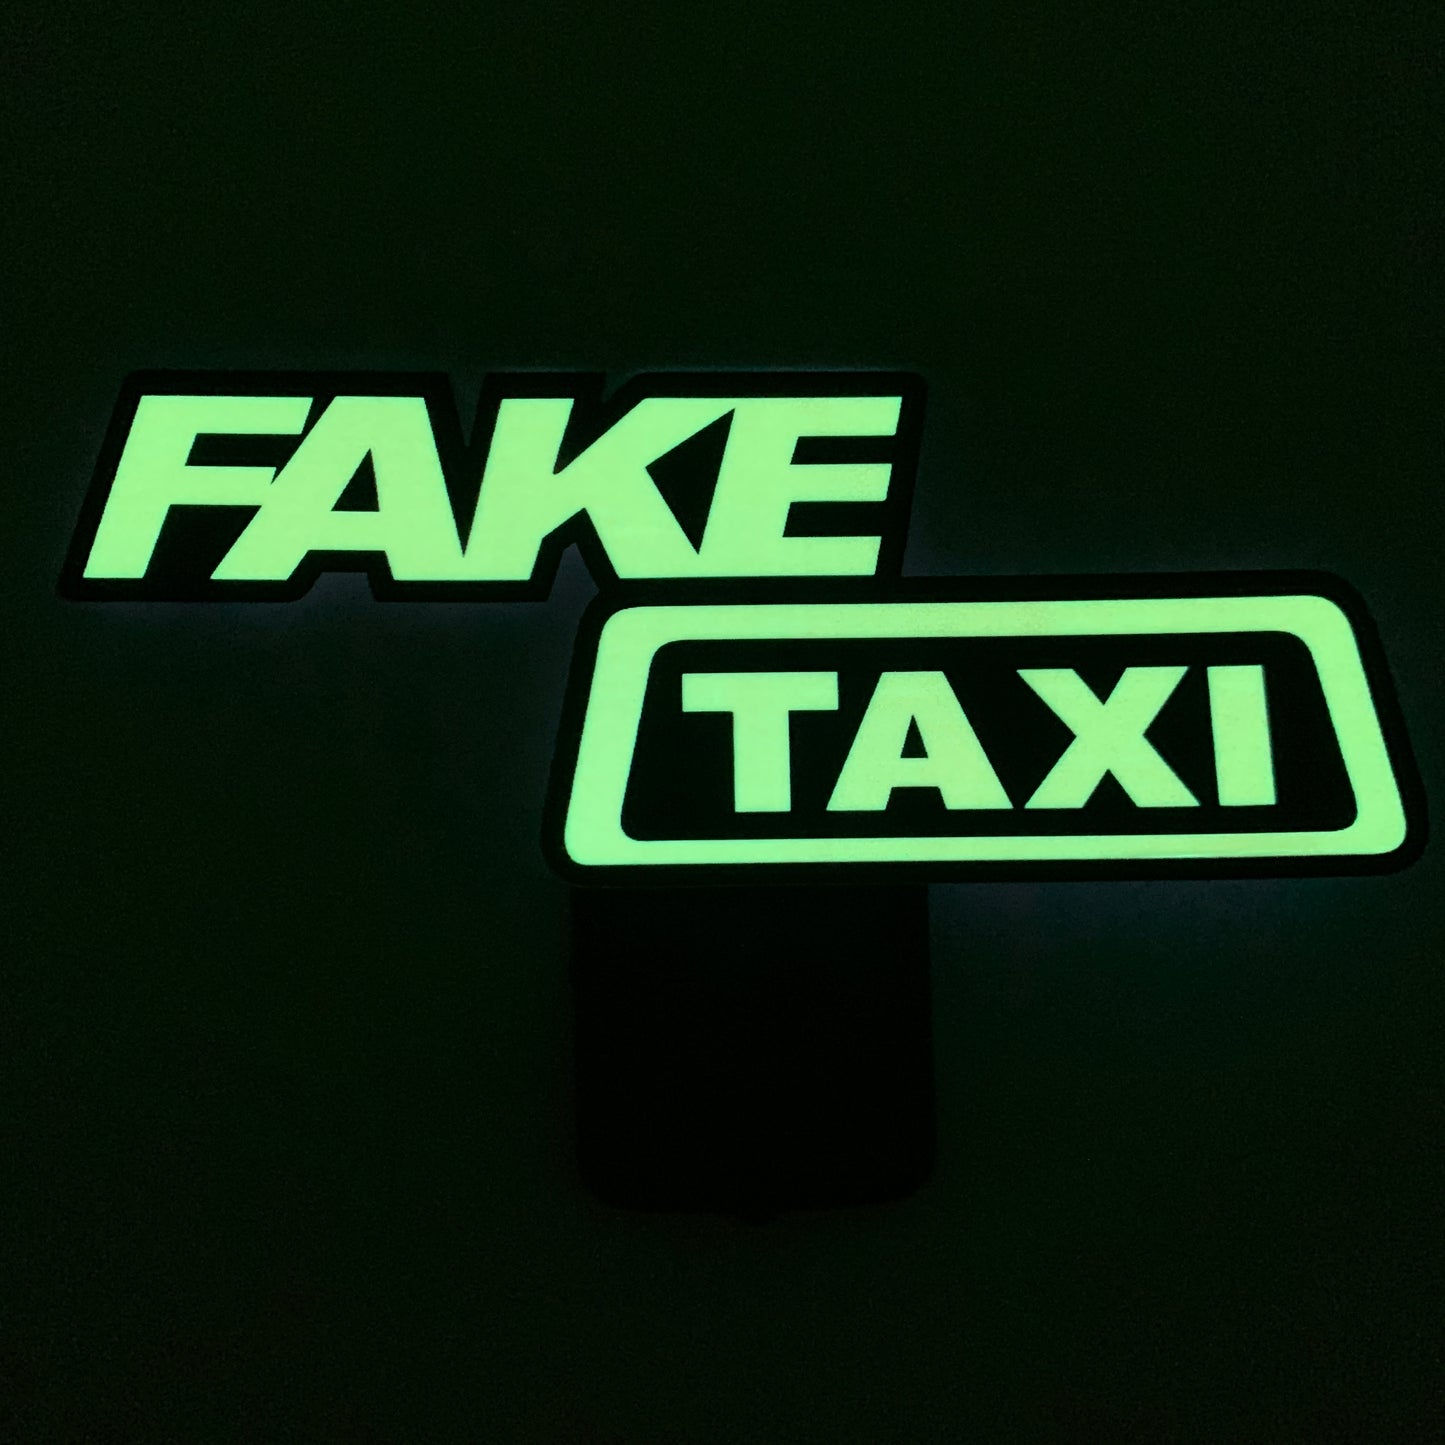 LED Animated/Sound activated stickers